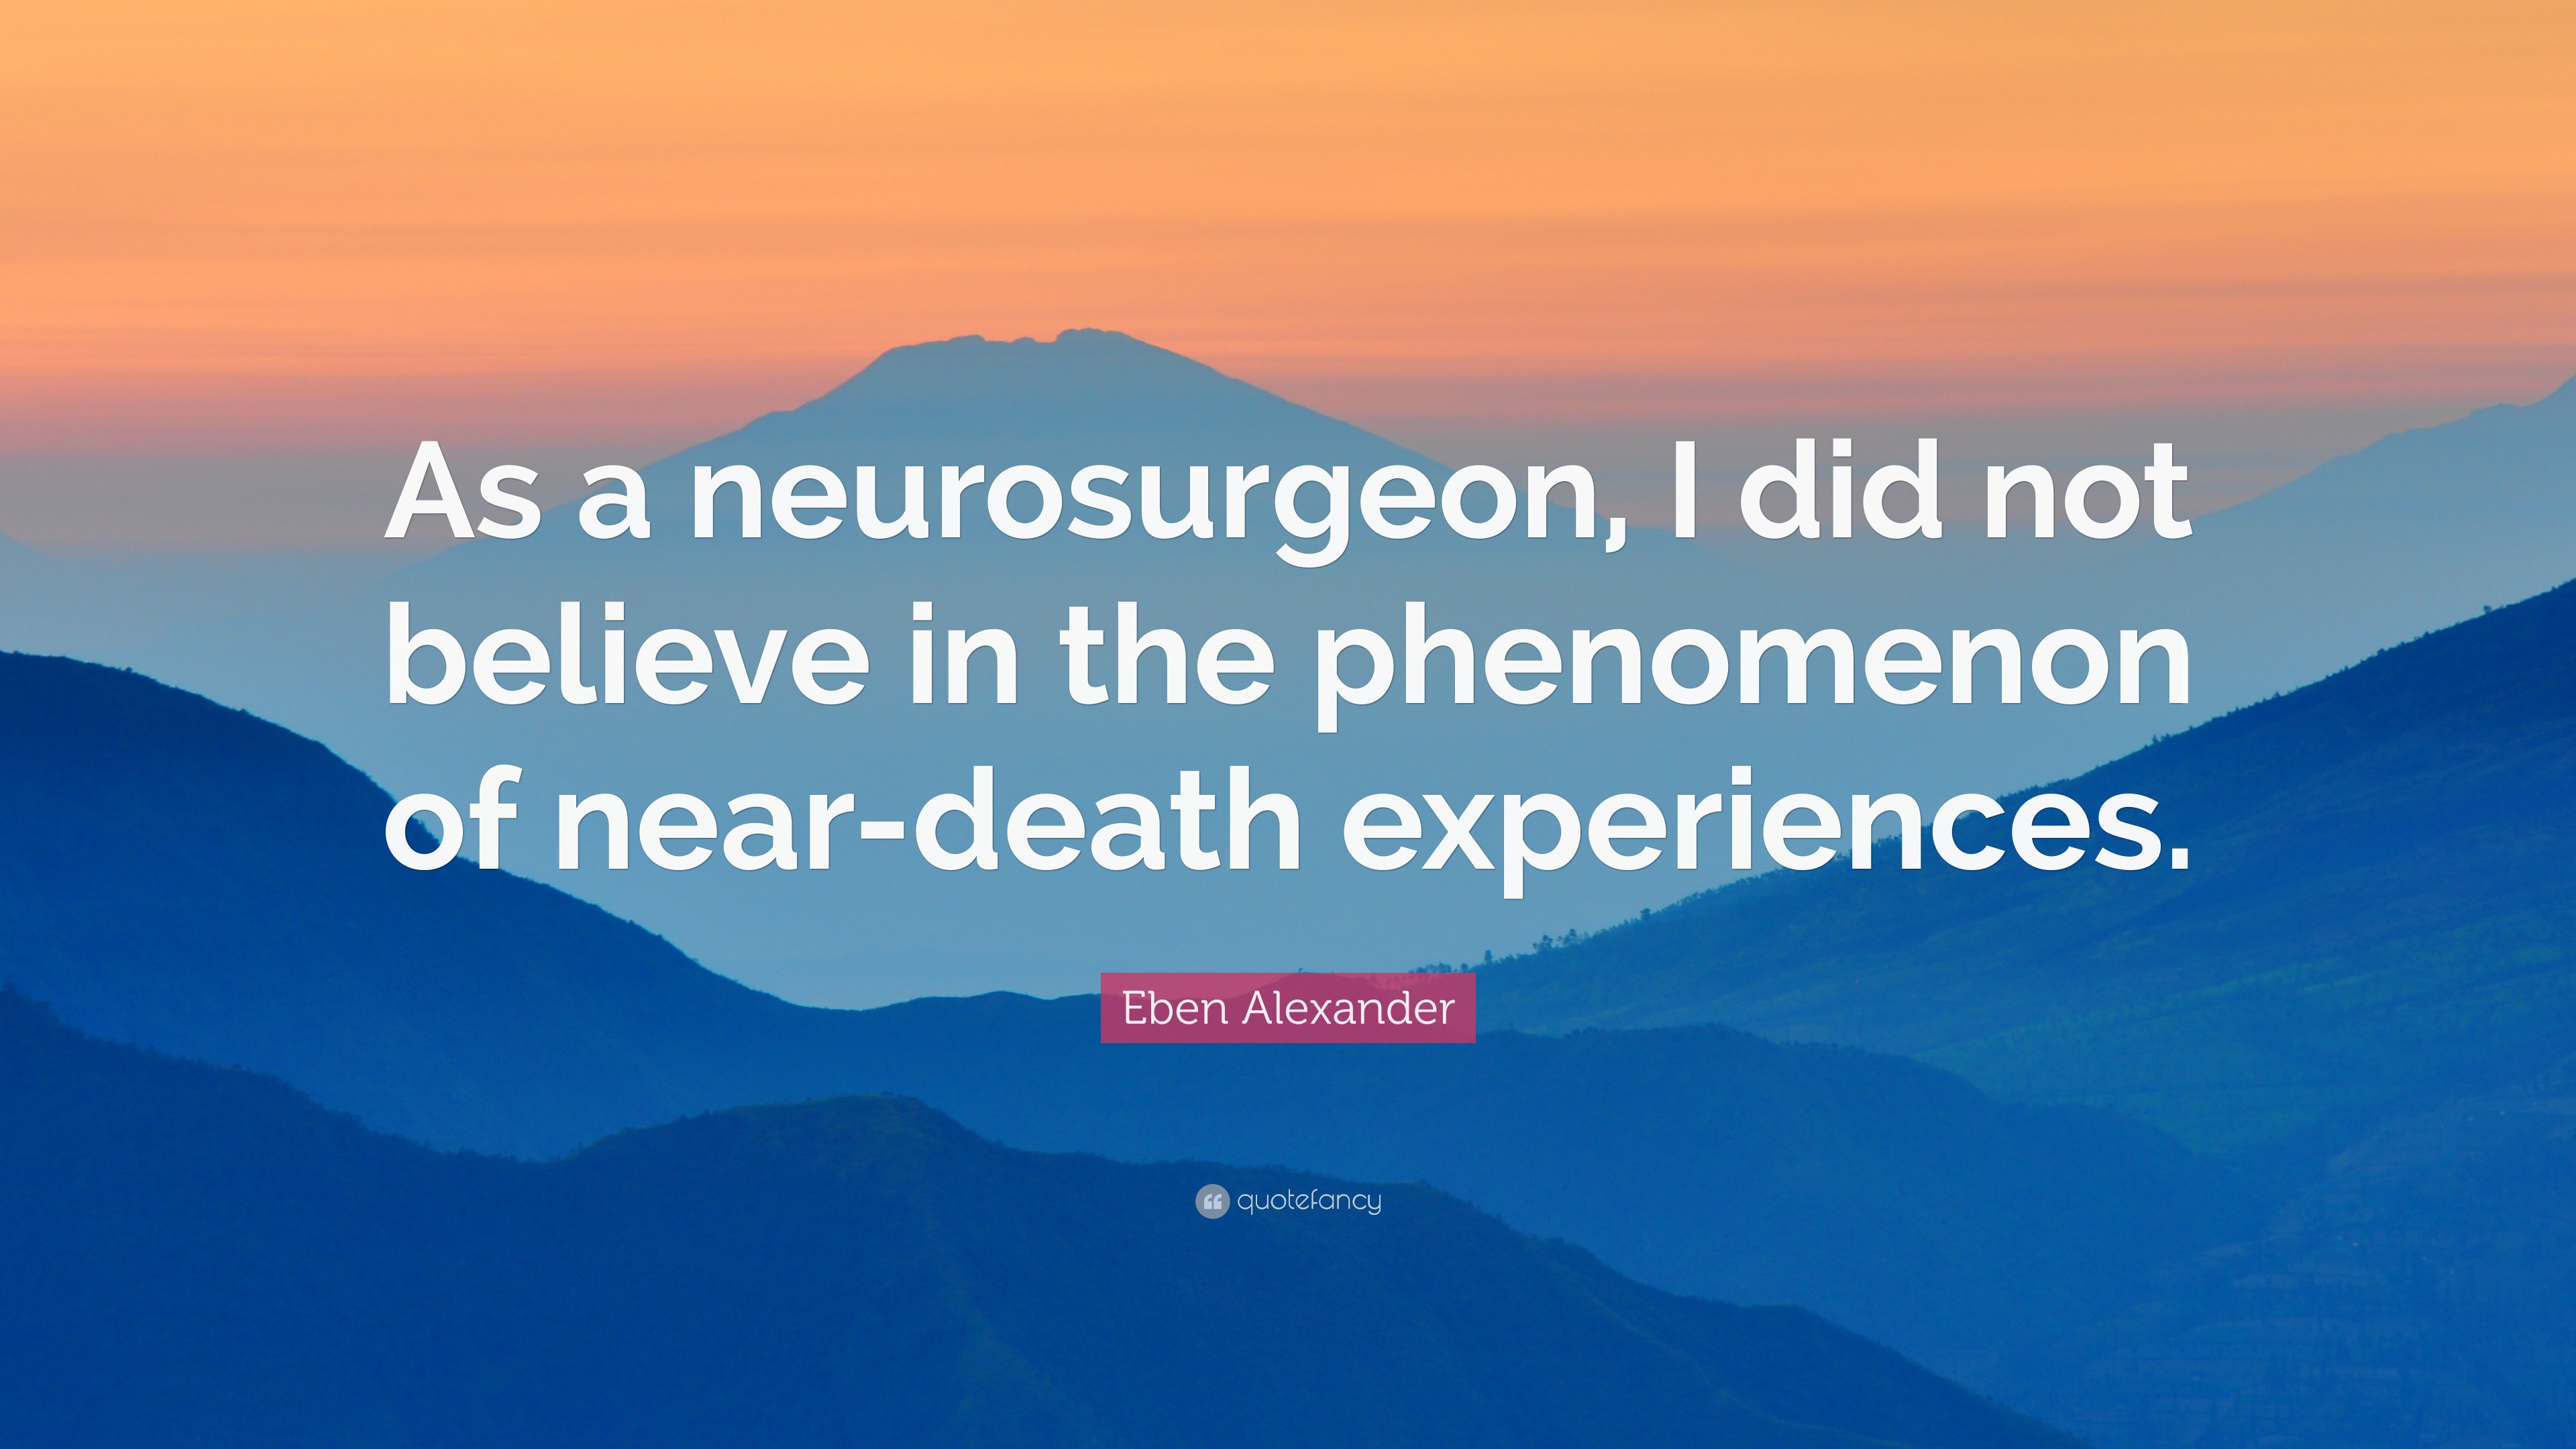 Eben Alexander Quote: “As a neurosurgeon, I did not believe in